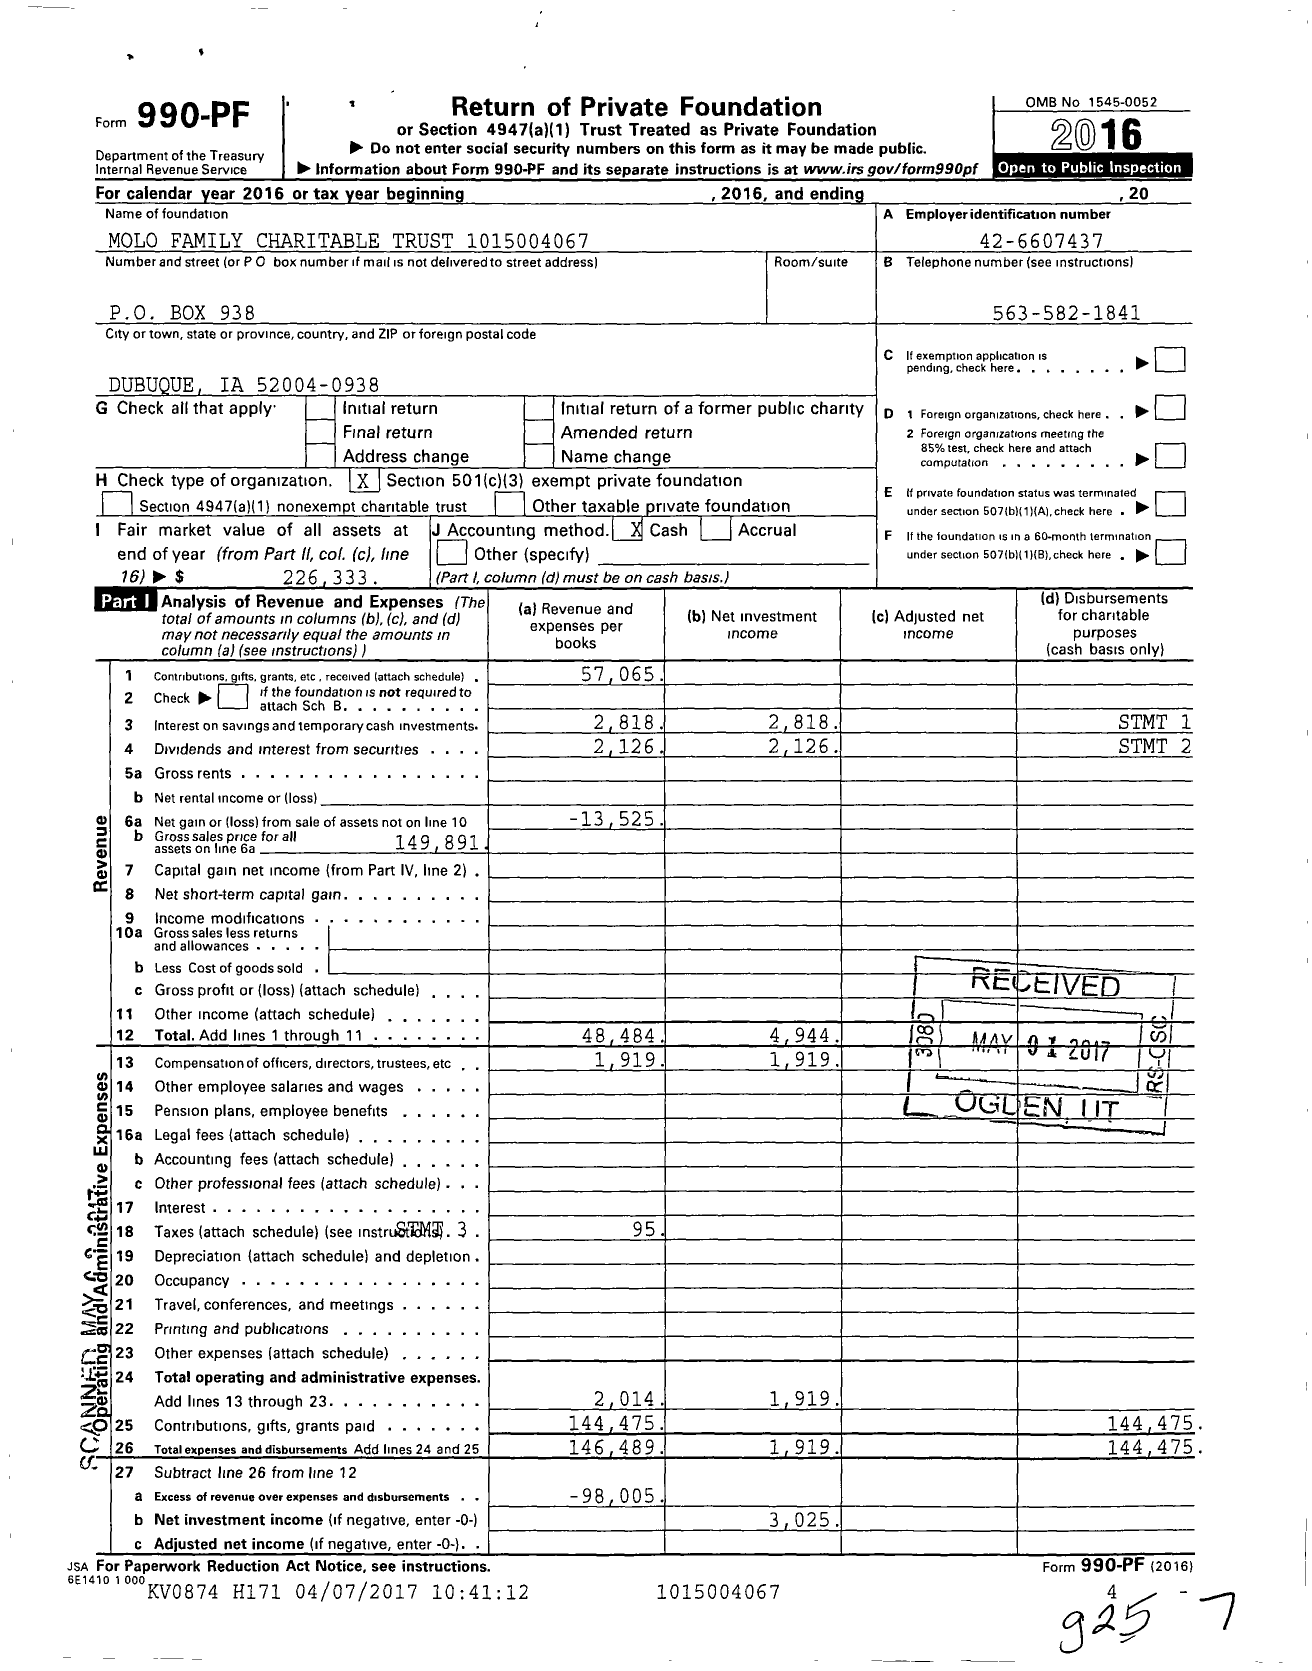 Image of first page of 2016 Form 990PF for Molo Family Charitable Trust 1015004067